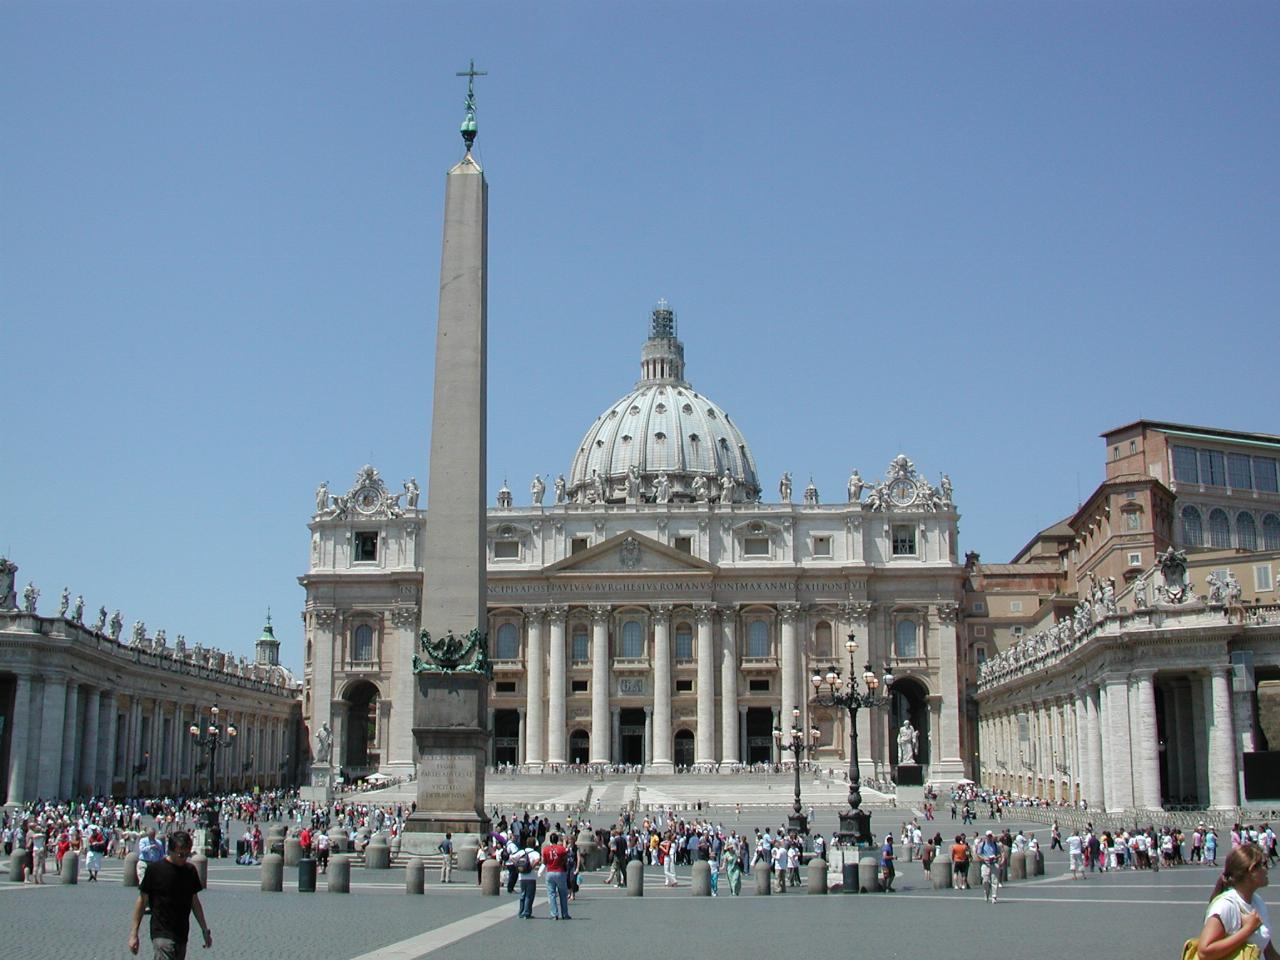 St. Peter's Basilica and Piazza